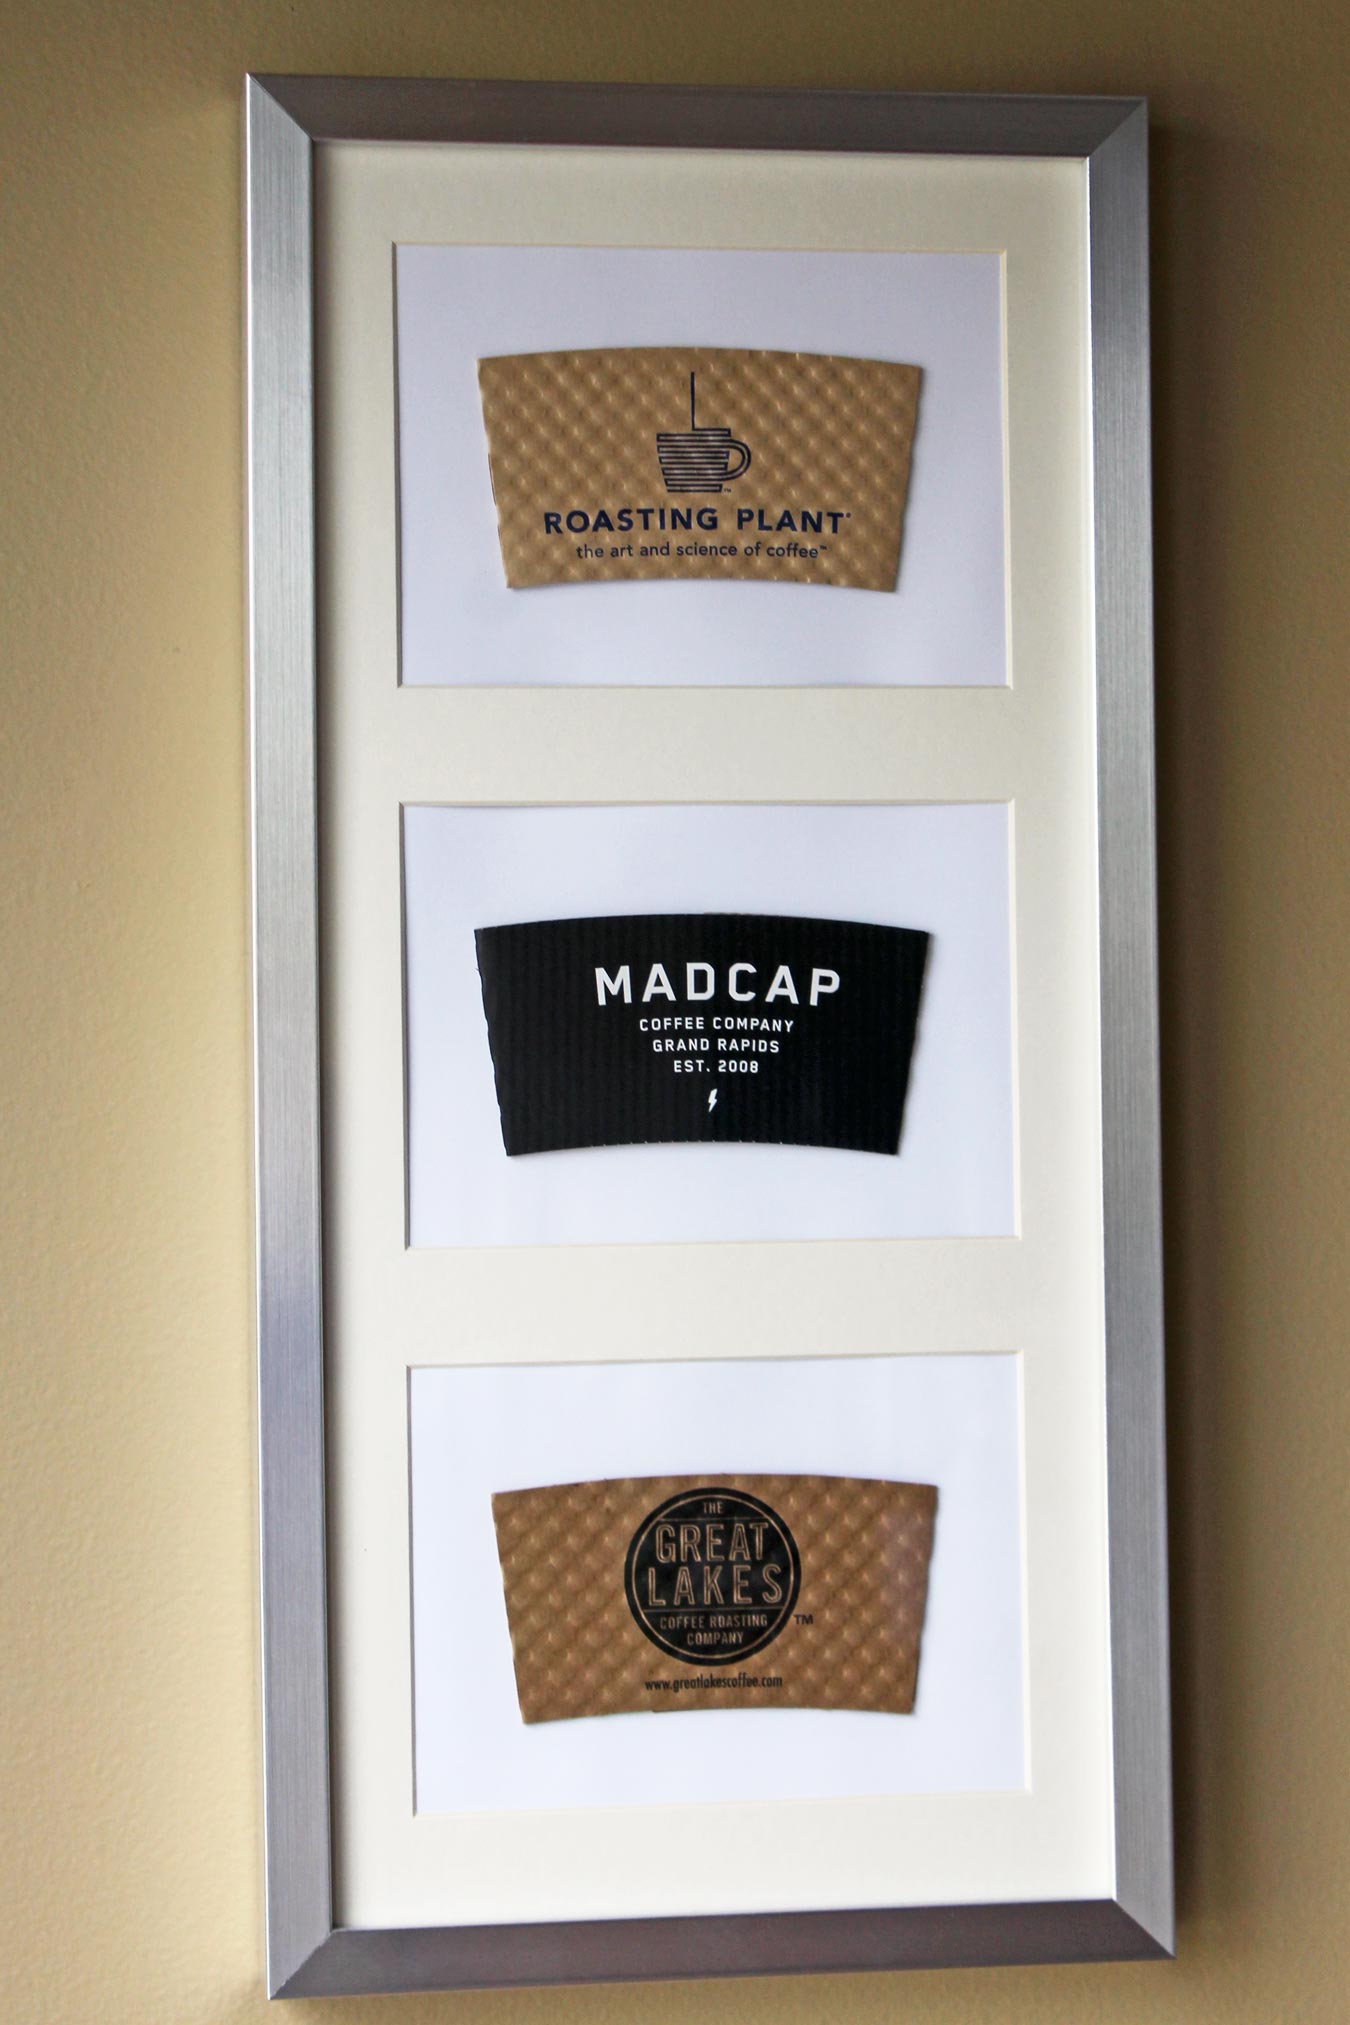 How To Repurpose Coffee Sleeves As Wall Art [via Wading in Big Shoes]